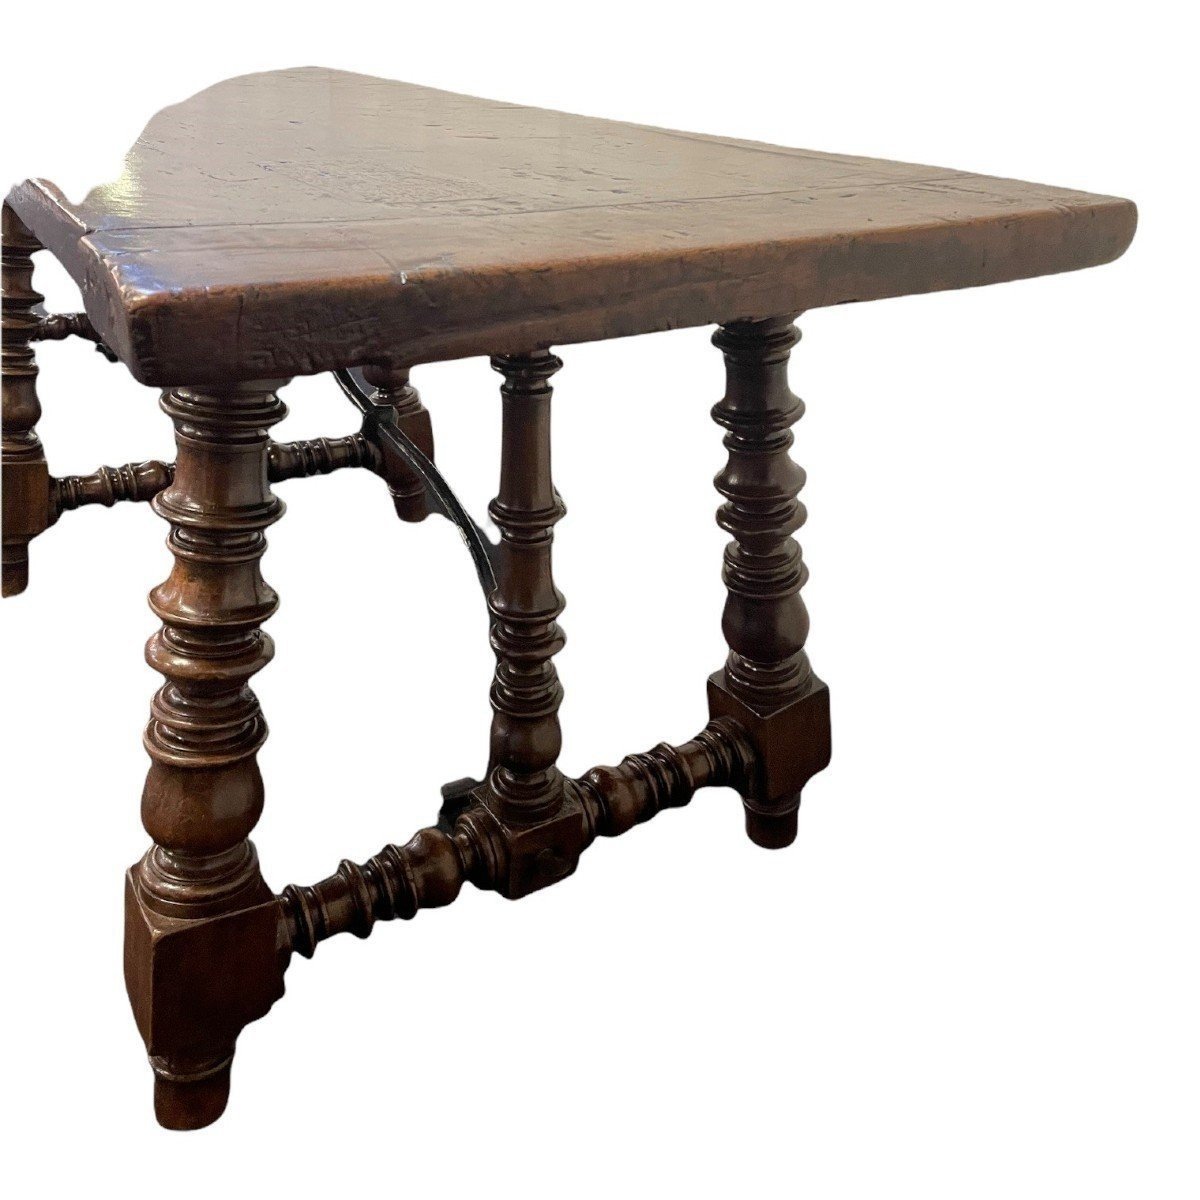 Large Spanish Table With 6 Legs In Walnut 17thc. (266 Cm).-photo-5